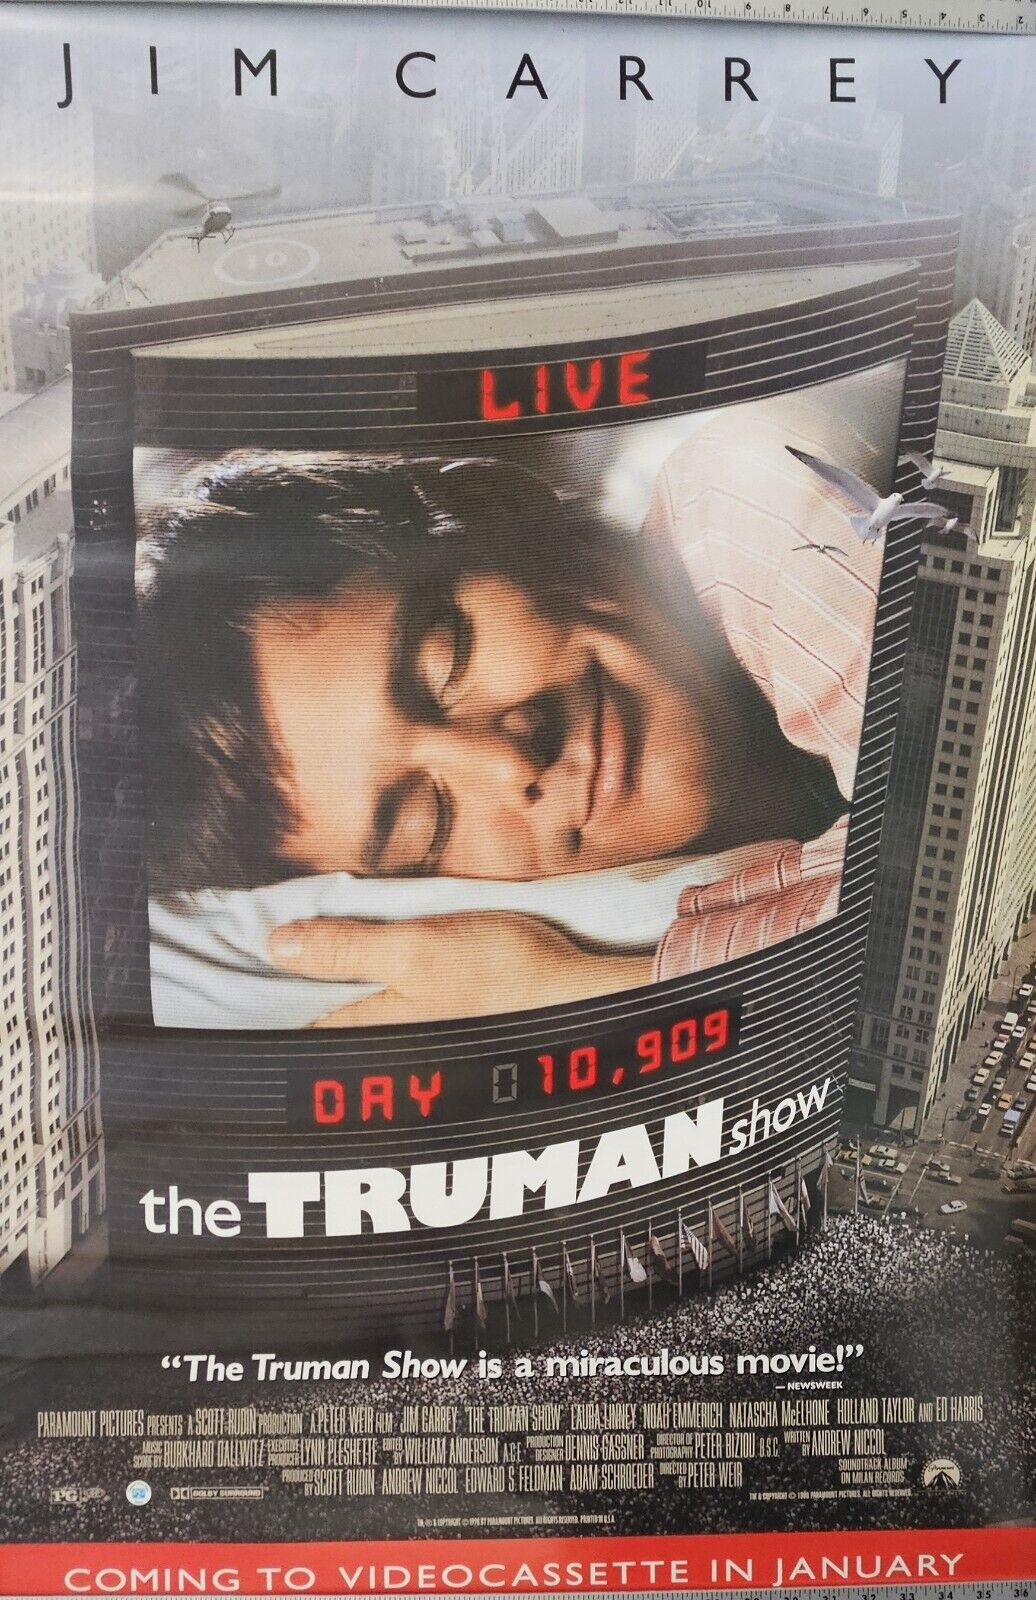 Jim Carrey Stars in THE TRUMAN SHOW 27 x 41.75  DVD promotional Movie poster